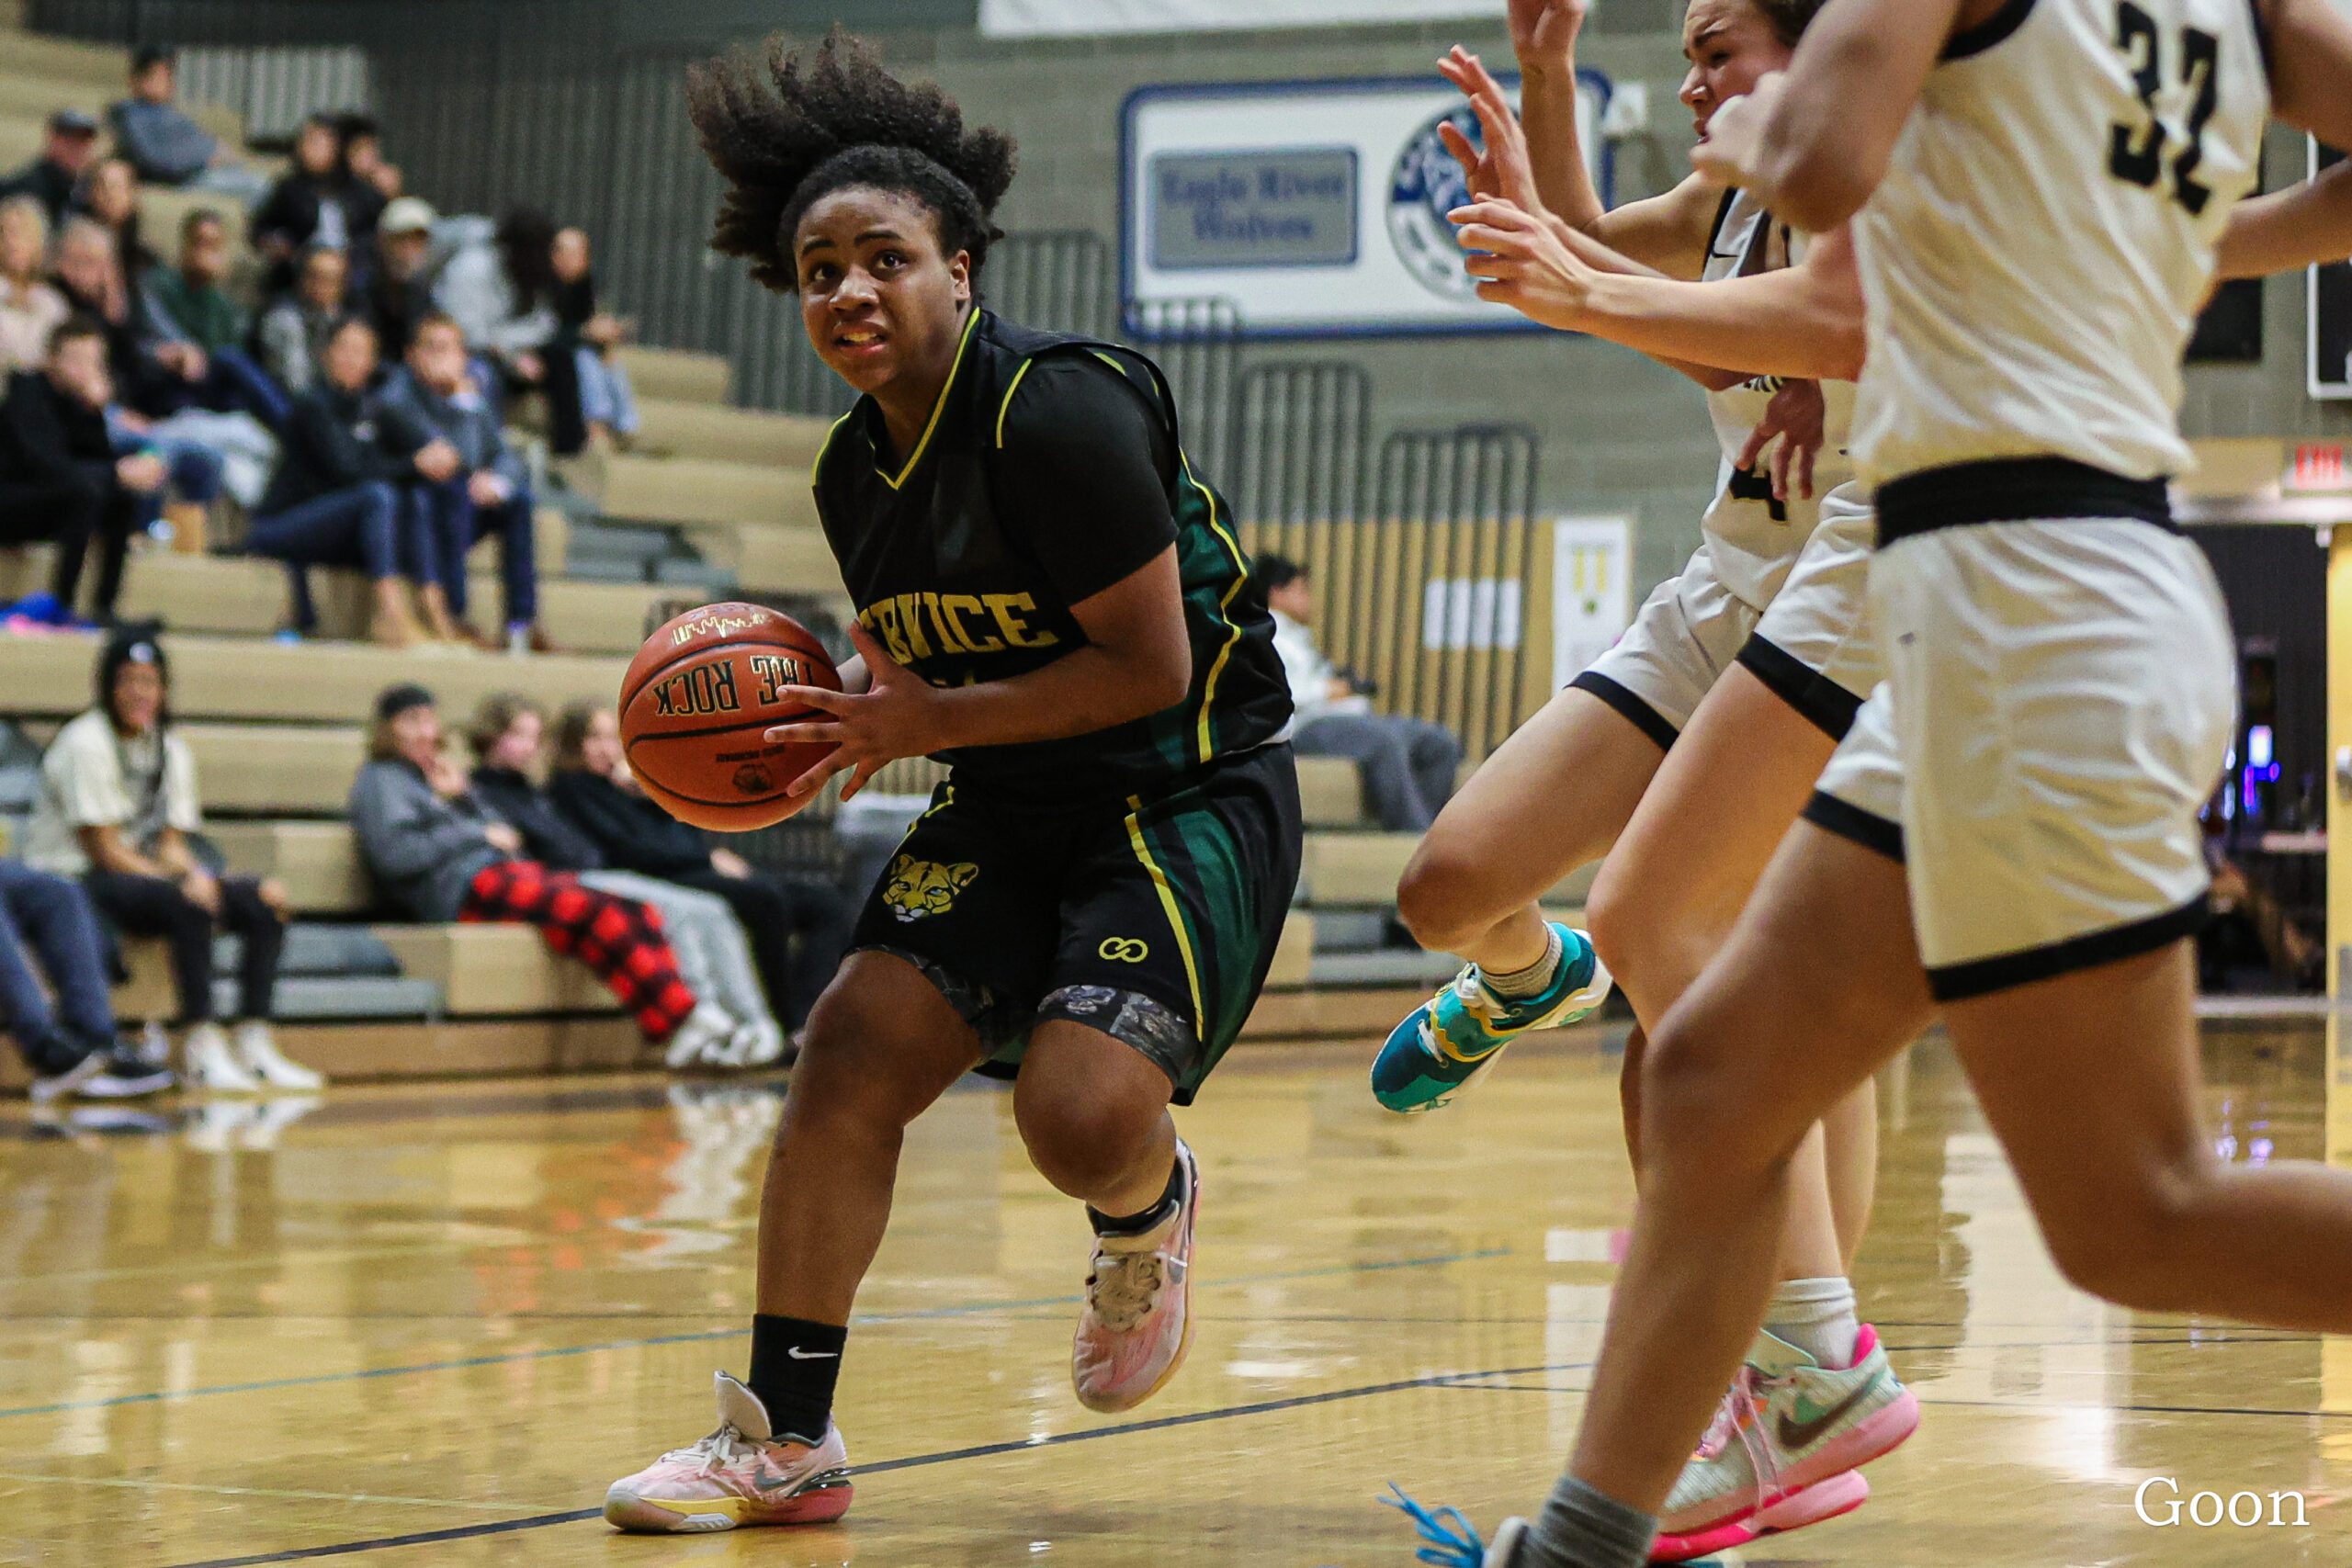 Prep Hoops: Aryanna Watson’s 30 points help Service girls hold off Bartlett 54-48 as youth movement takes center stage